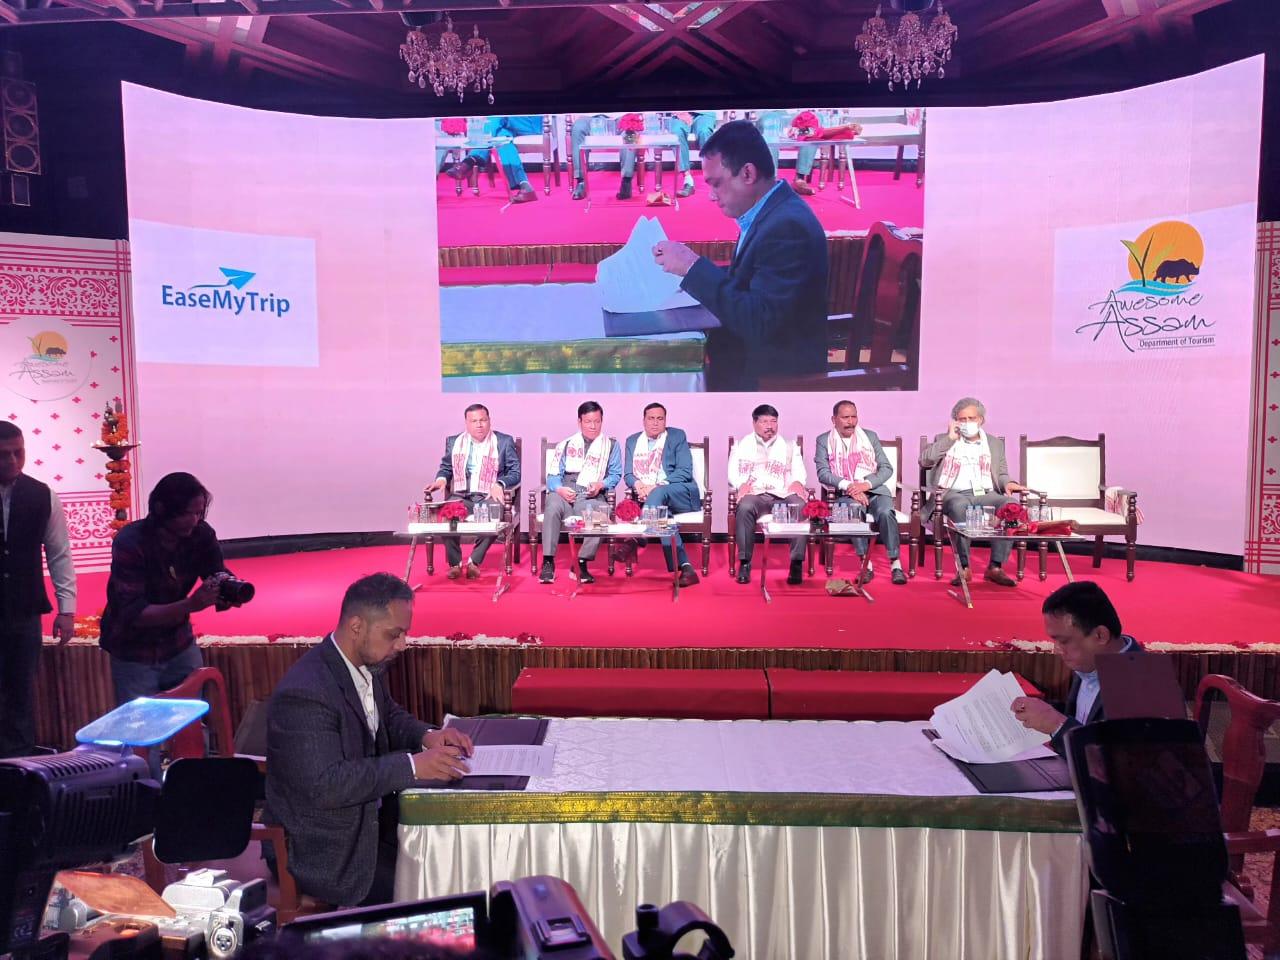 EaseMyTrip signs a MoU with Assam Tourism Development Corporation to develop tourism in the state